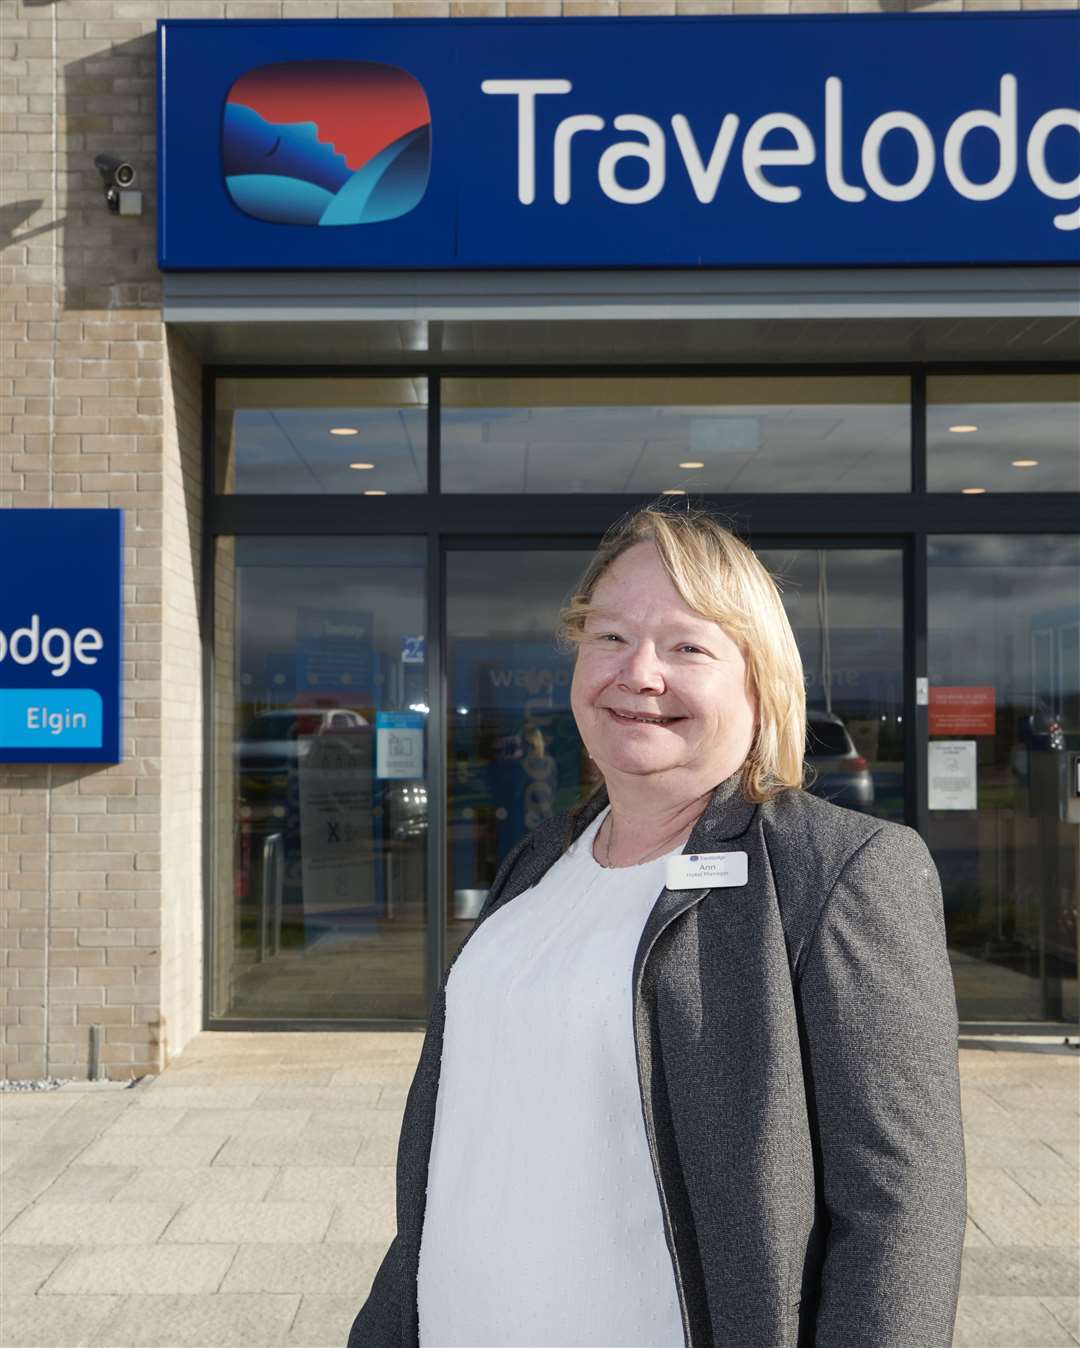 Travelodge Elgin hotel manager Ann Howie.